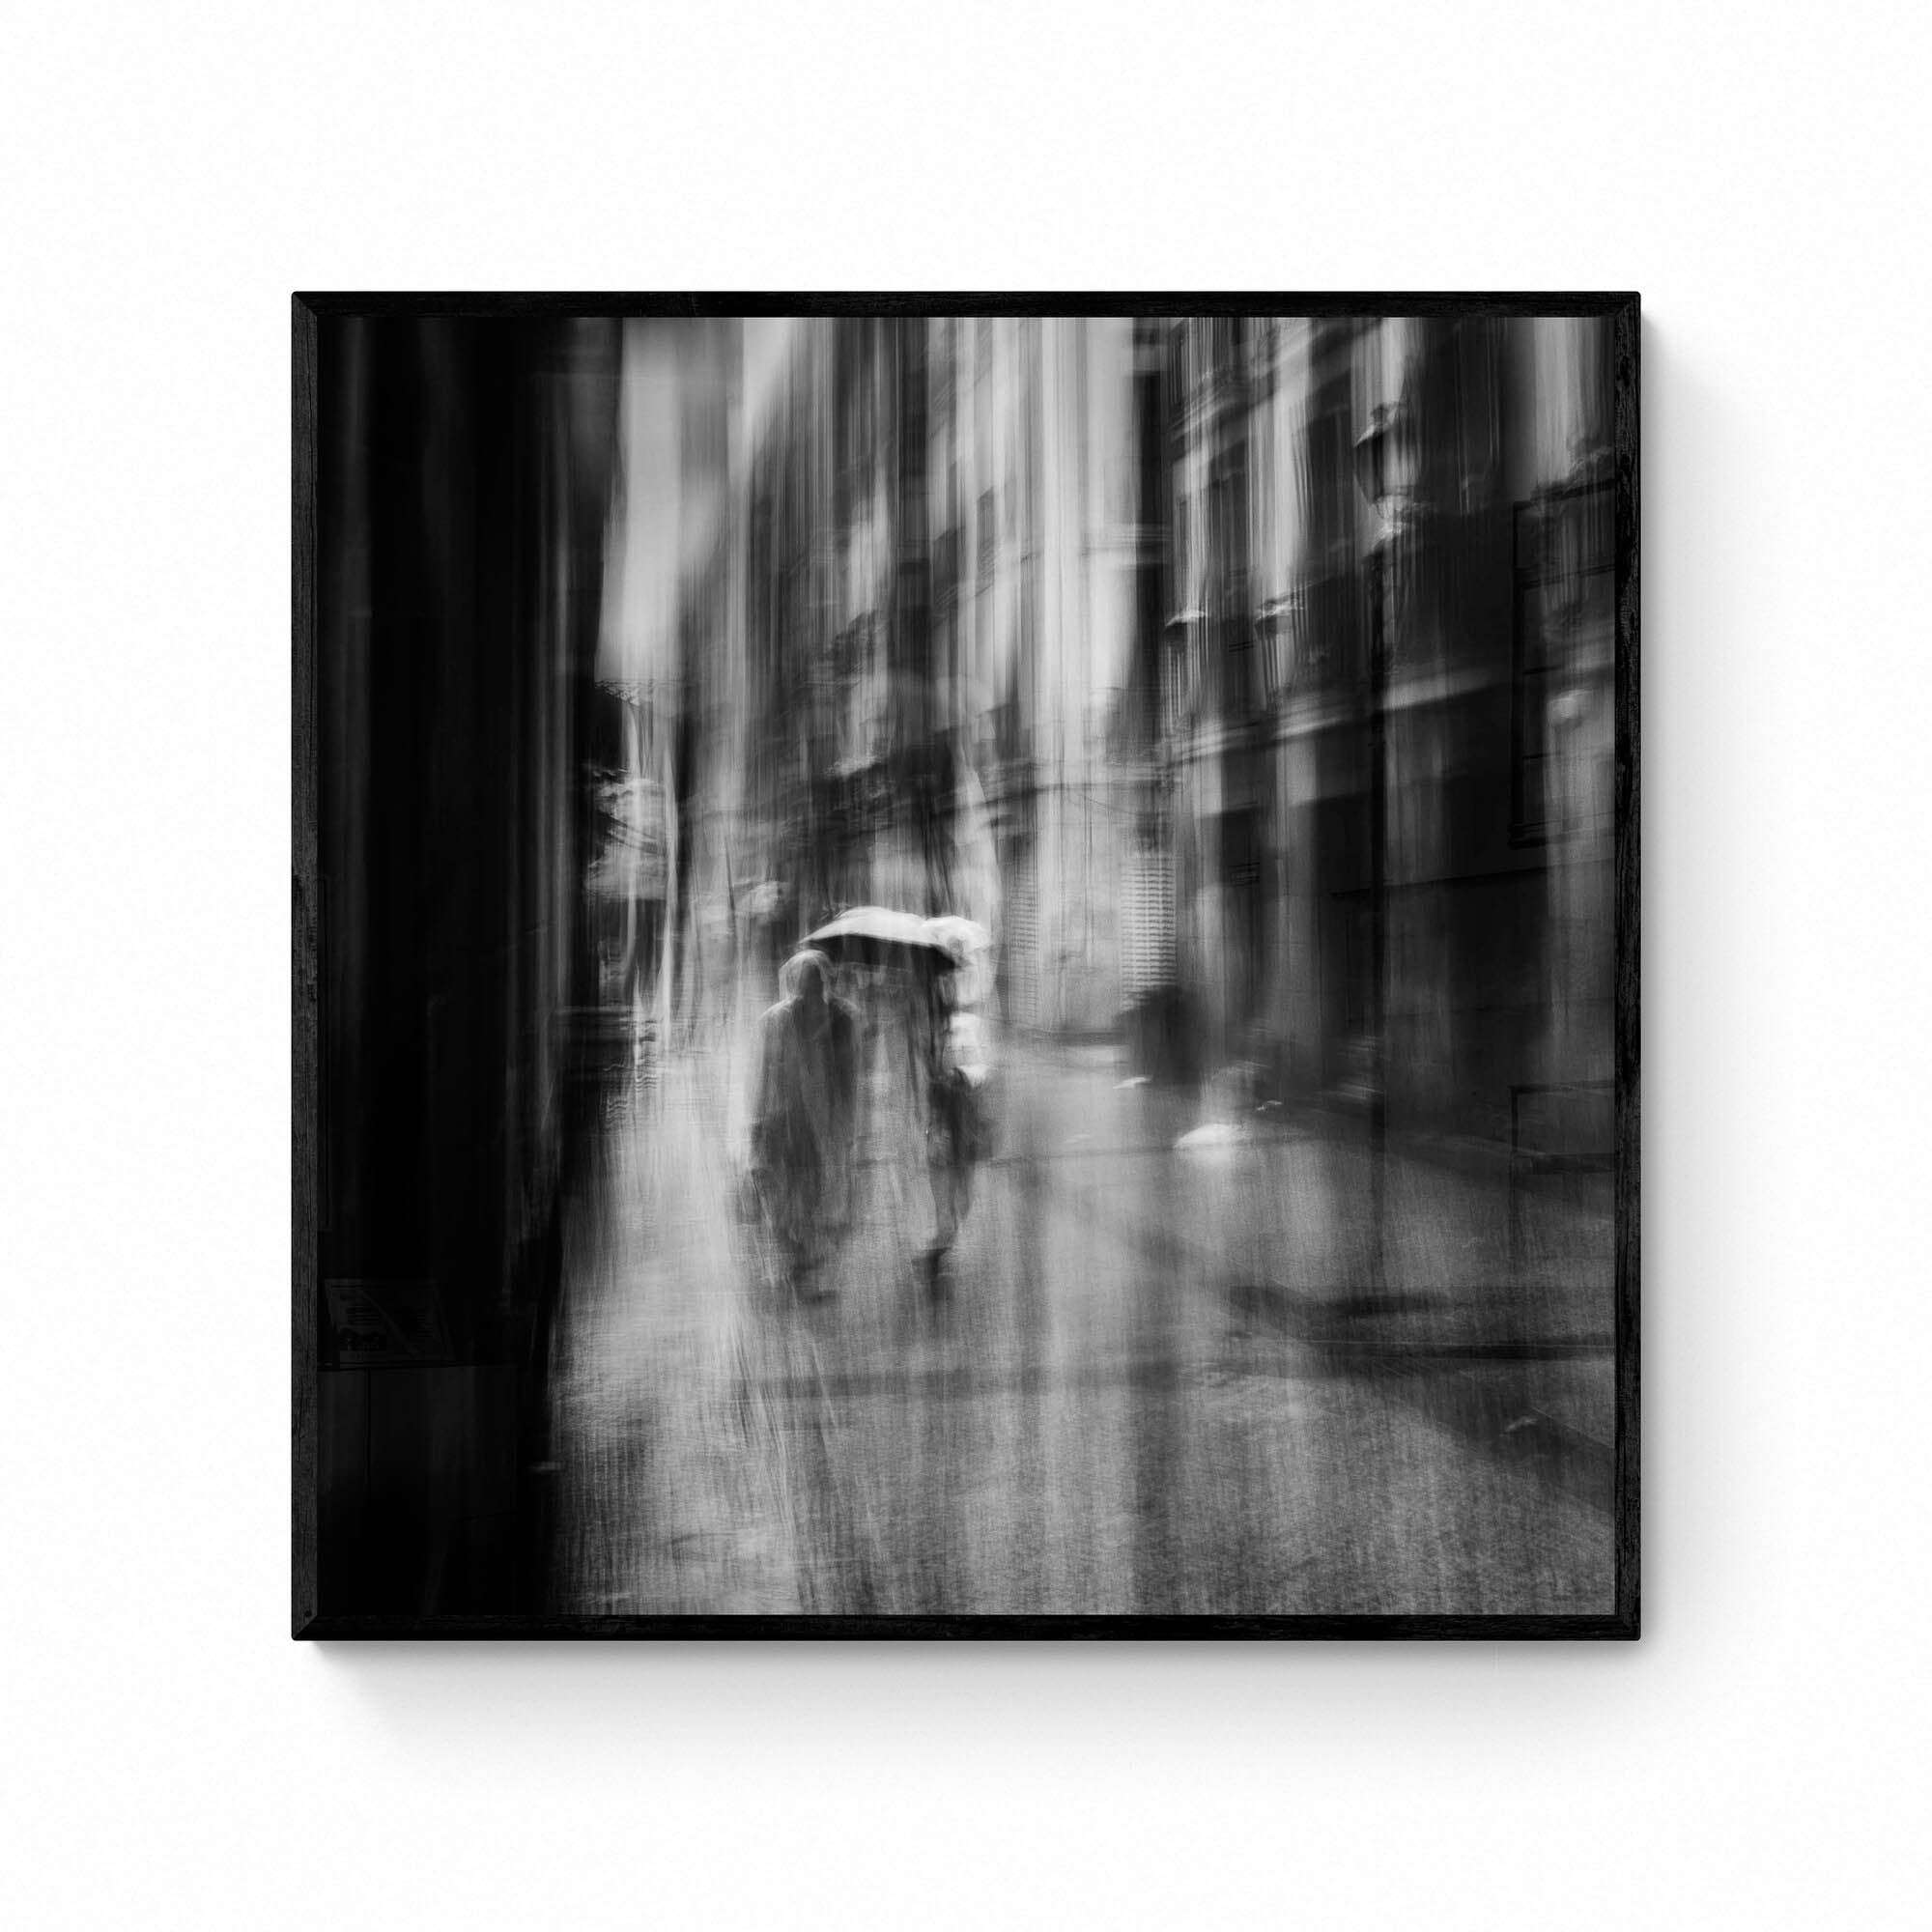 Black and white image of blurred figures under an umbrella on a rainy street in San Sebastian, Spain, creating an ethereal atmosphere.